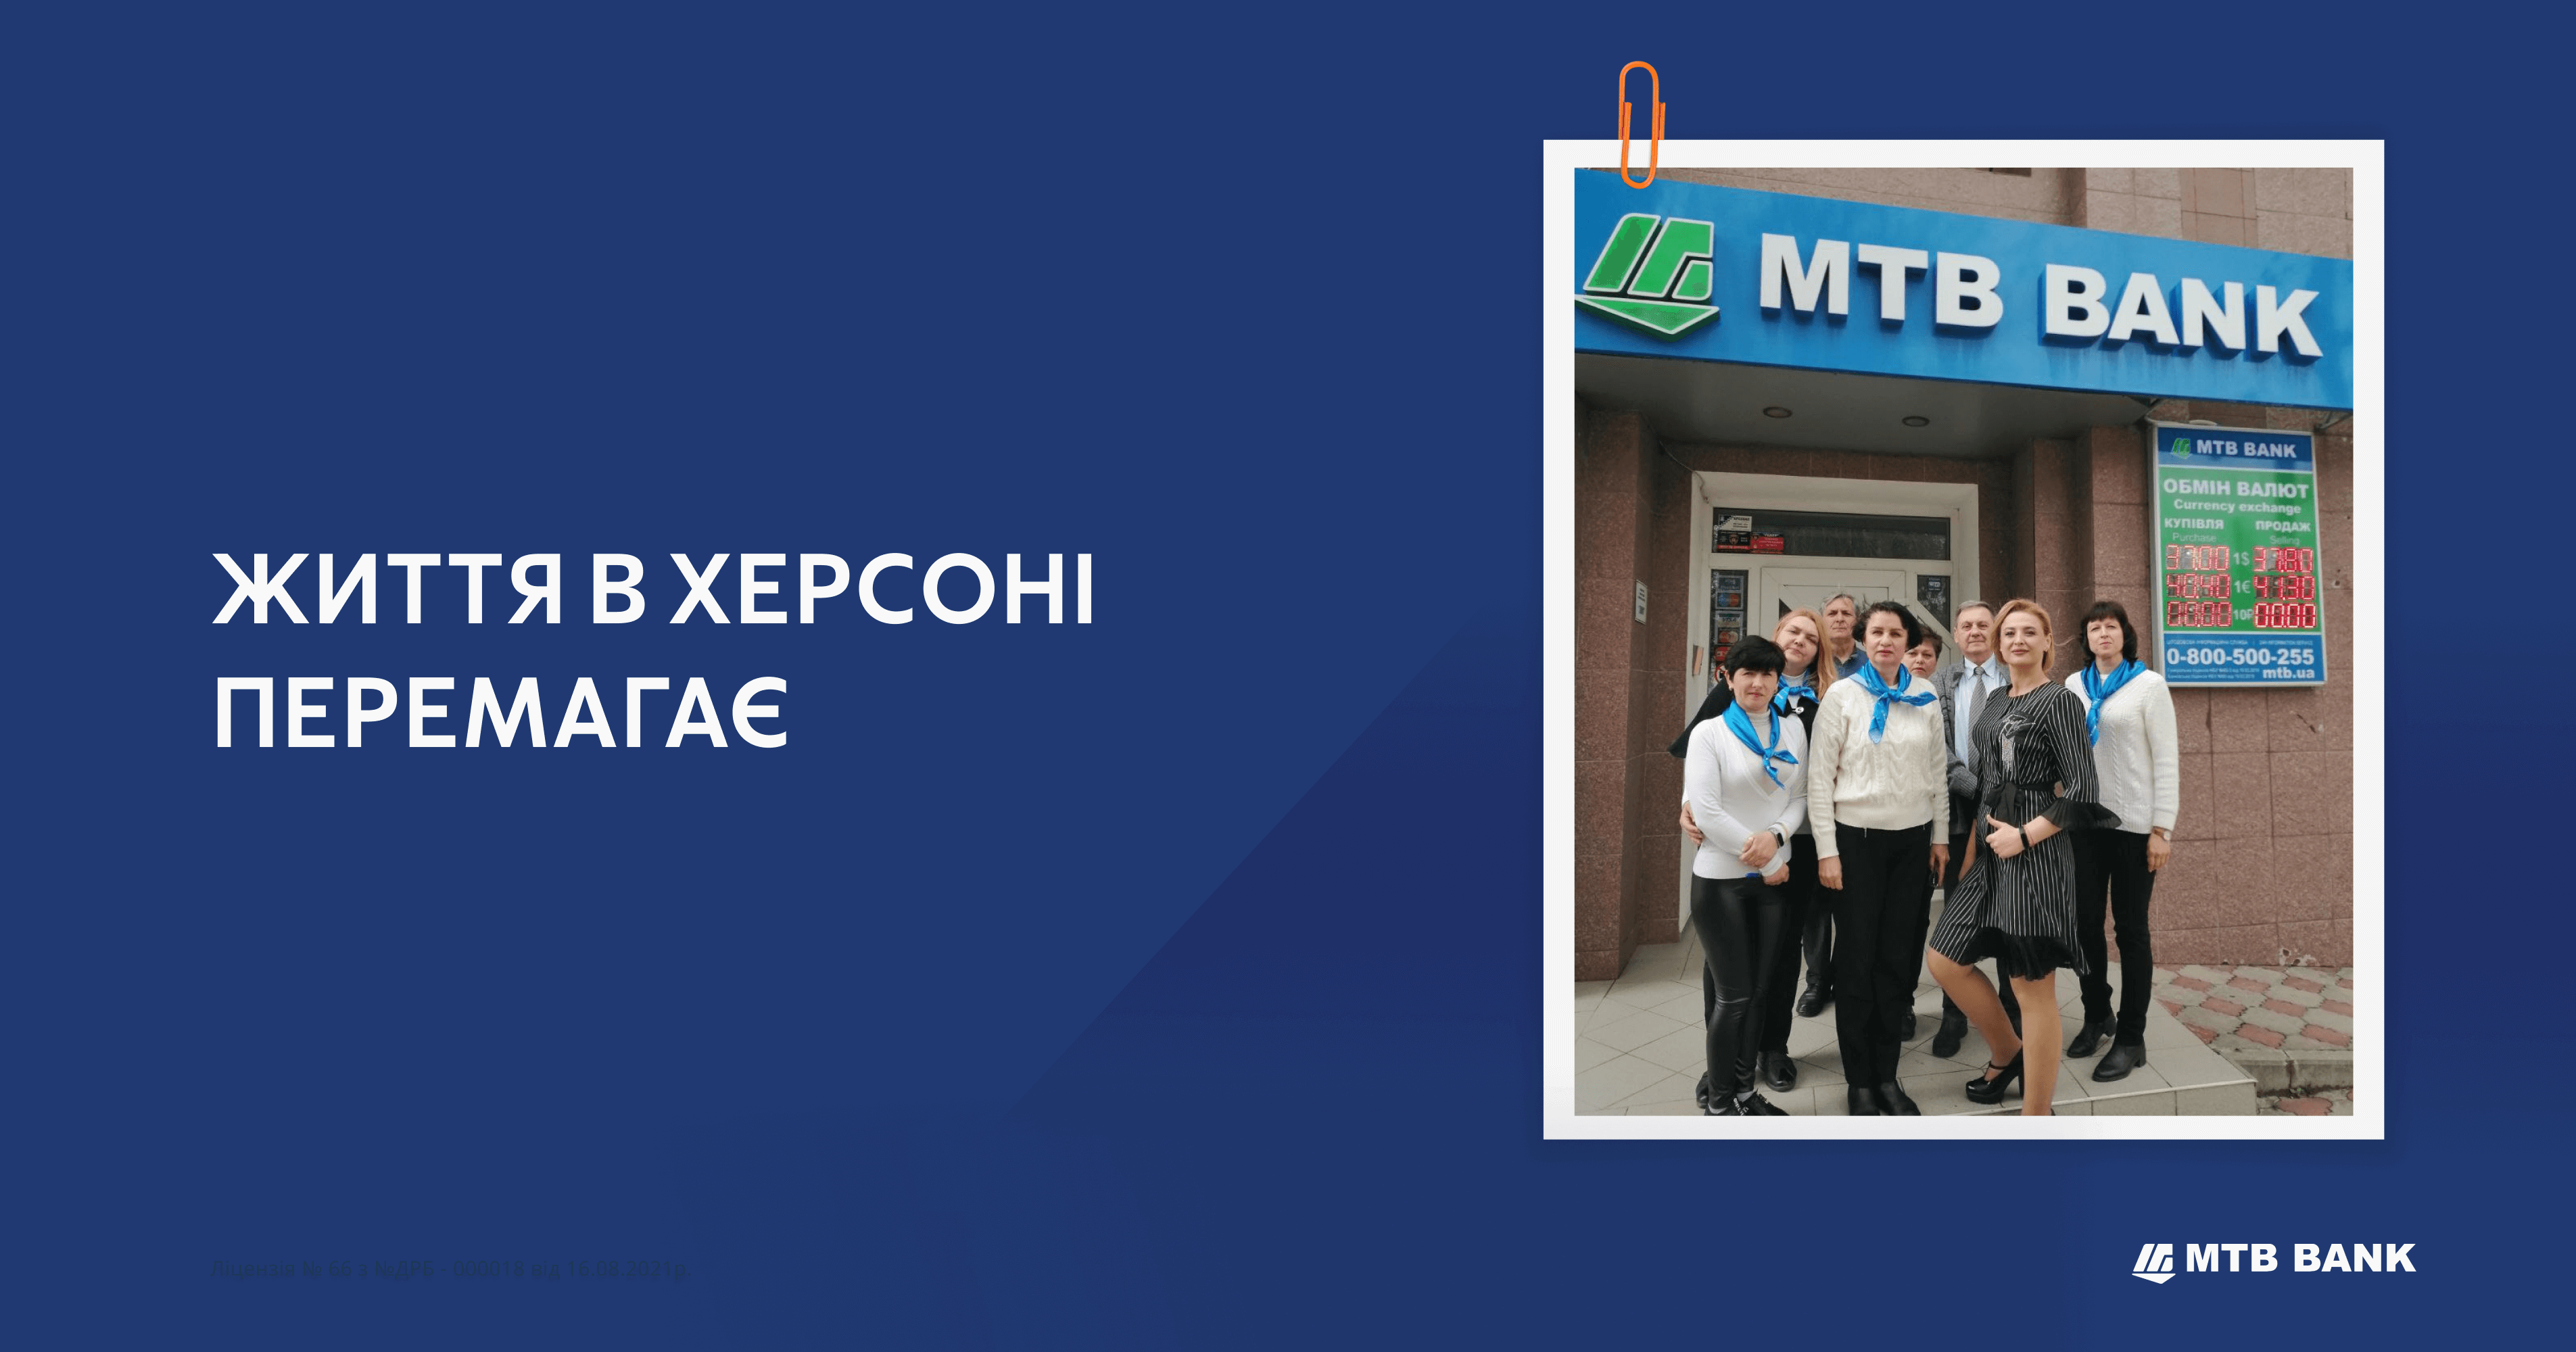 The Kherson branch of MTB Bank doubles the volume of client transactions every month - photo - mtb.ua